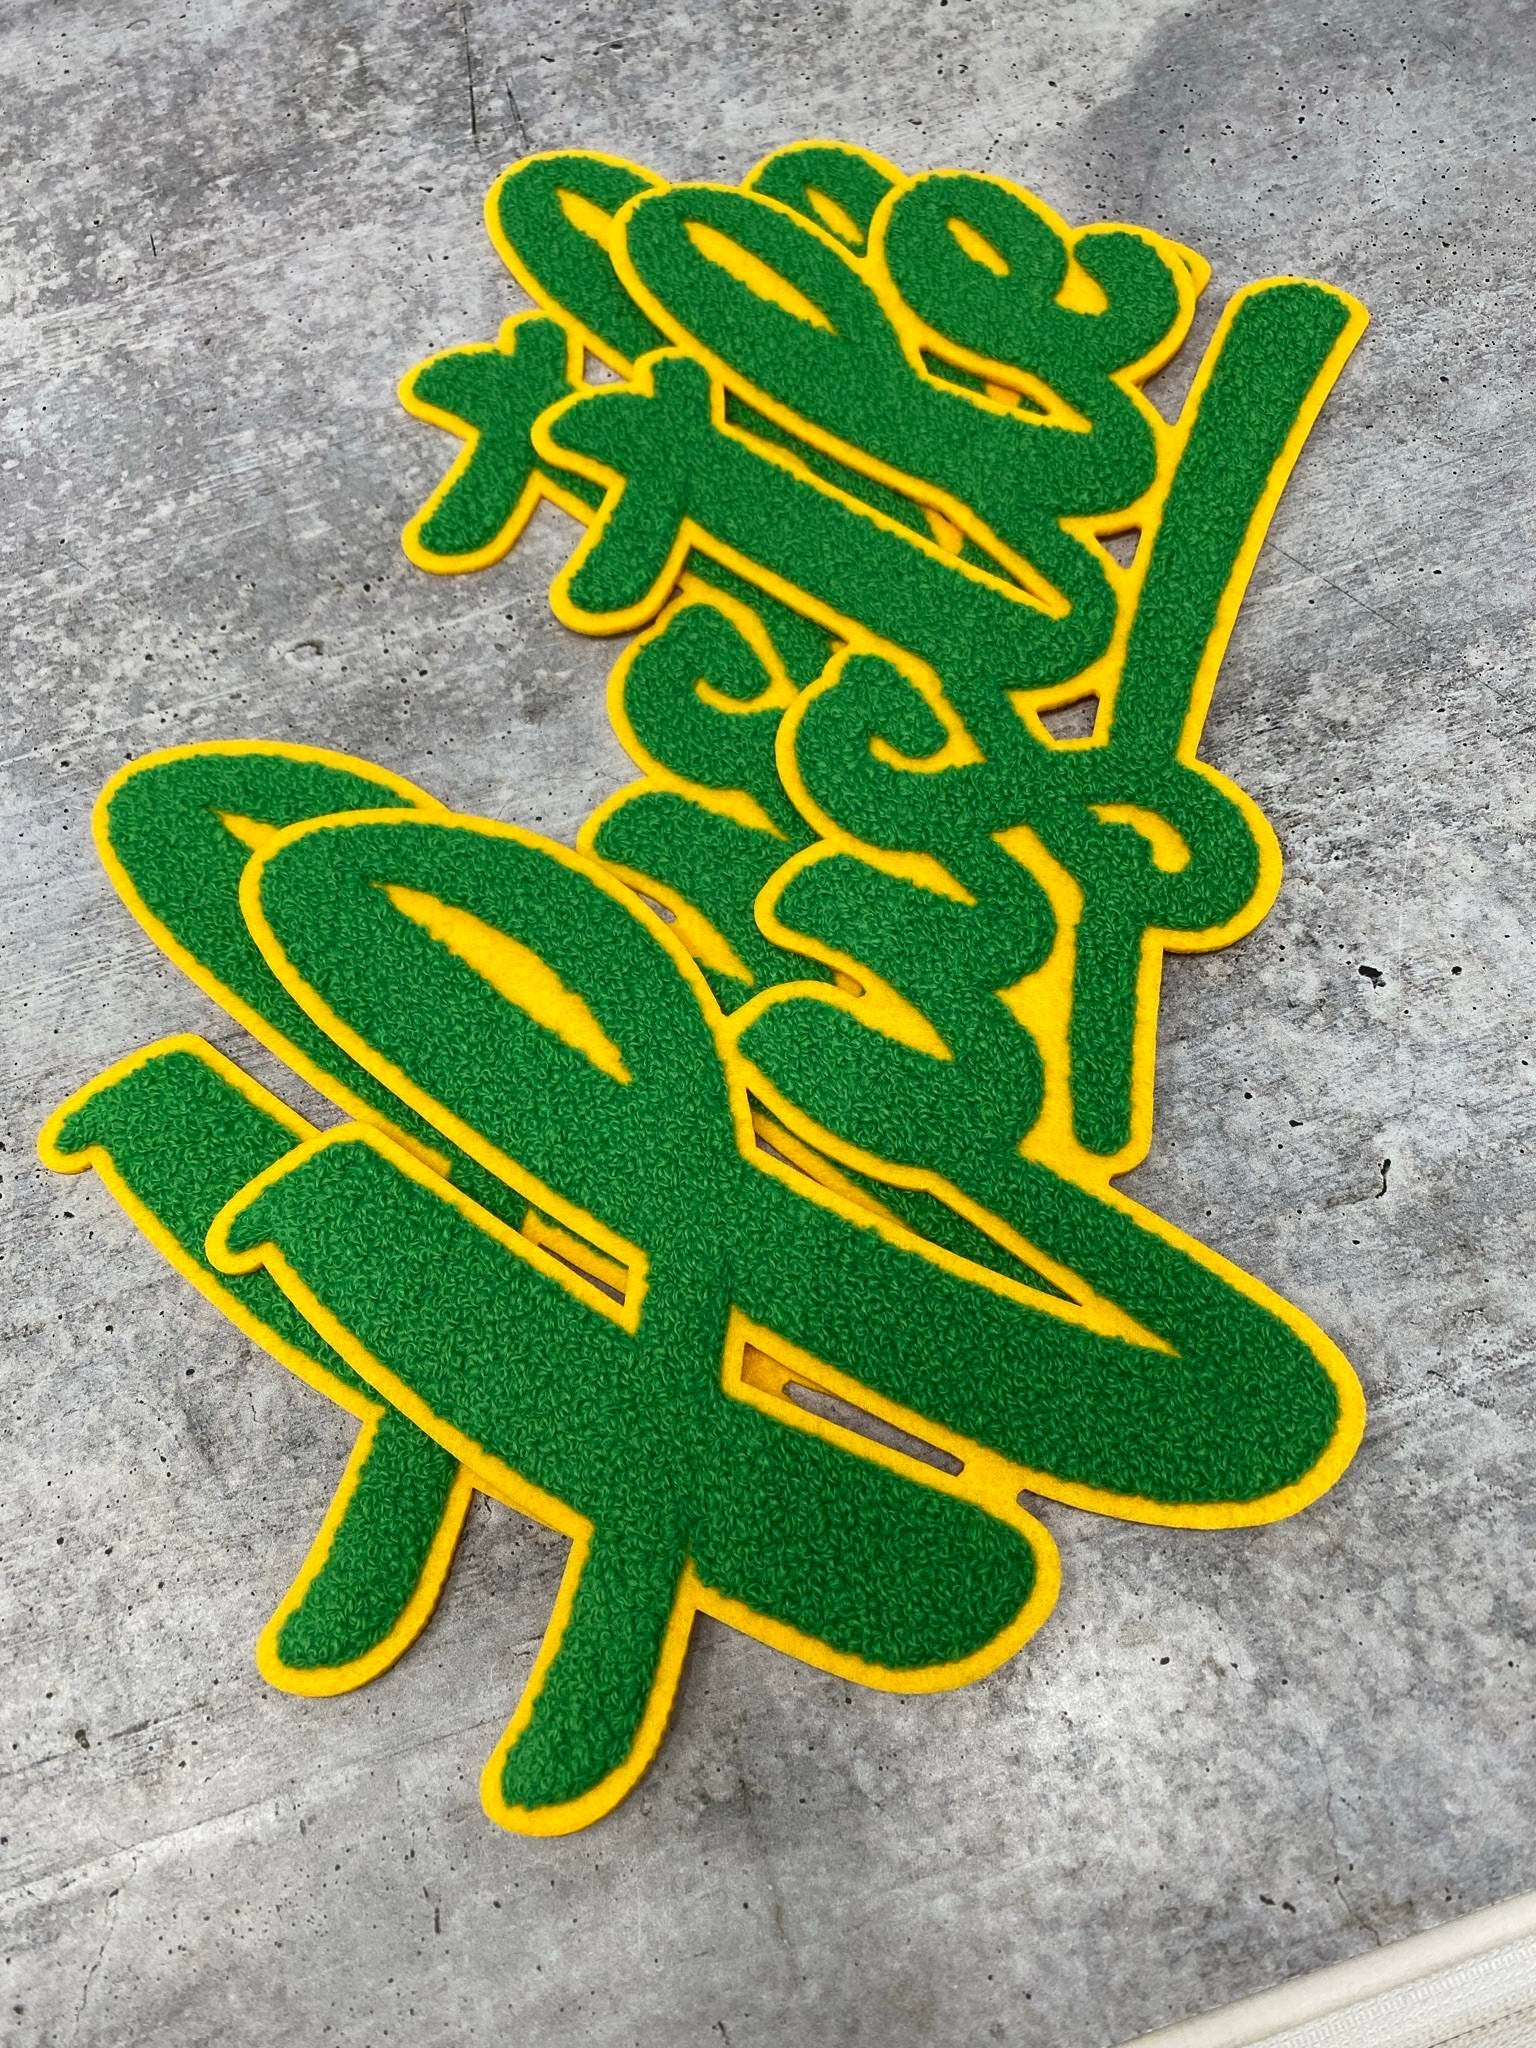 Exclusive, Green & Gold "Hustle" Chenille Patch (iron-on) Size 10"x8", Varsity Patch for Denim Jacket, Shirts and Hoodies, Large Patch